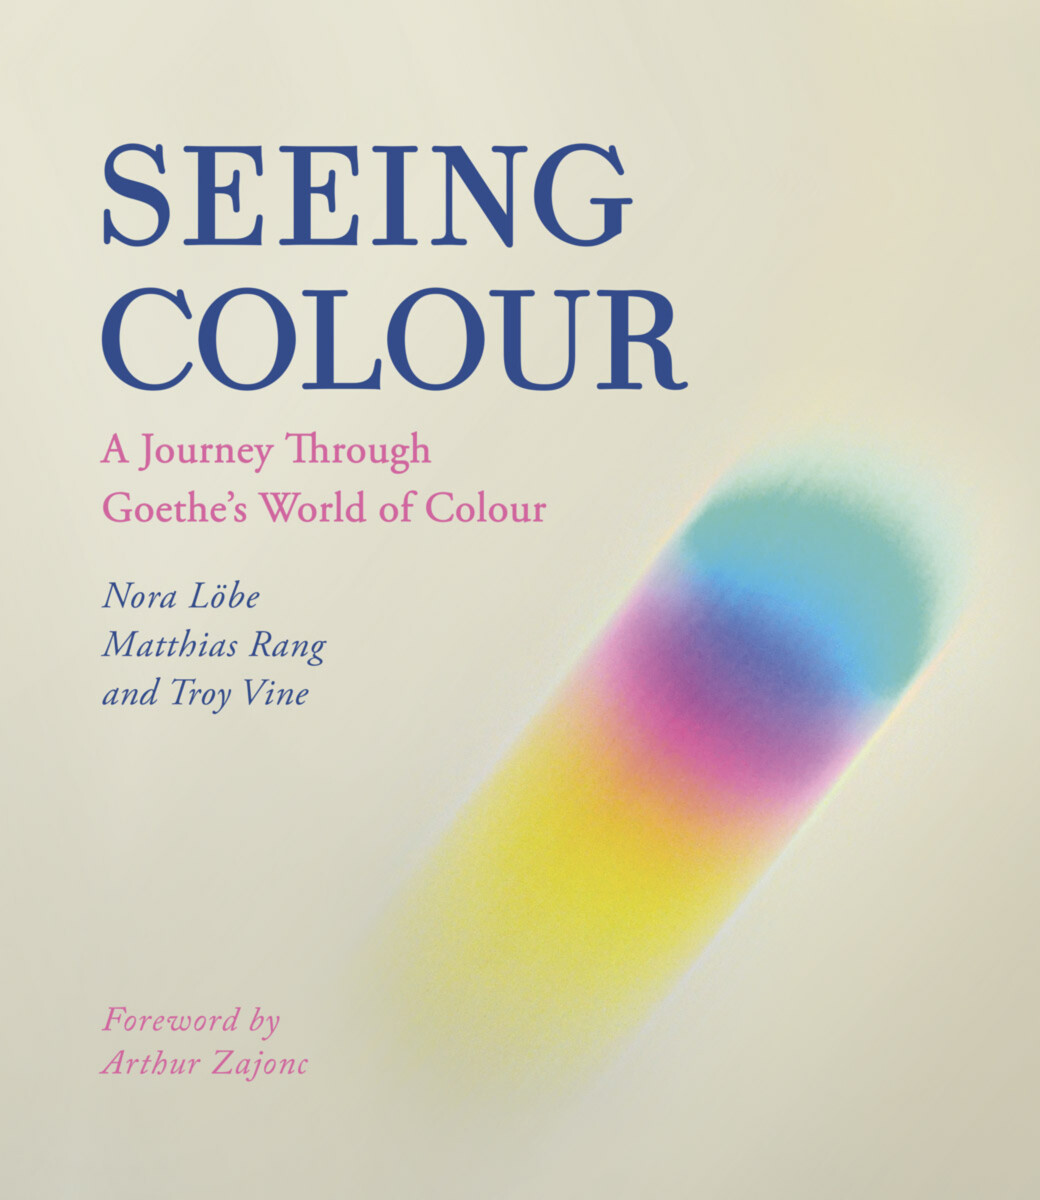 Seeing Colour-A Journey through Goethe’s World of Colour